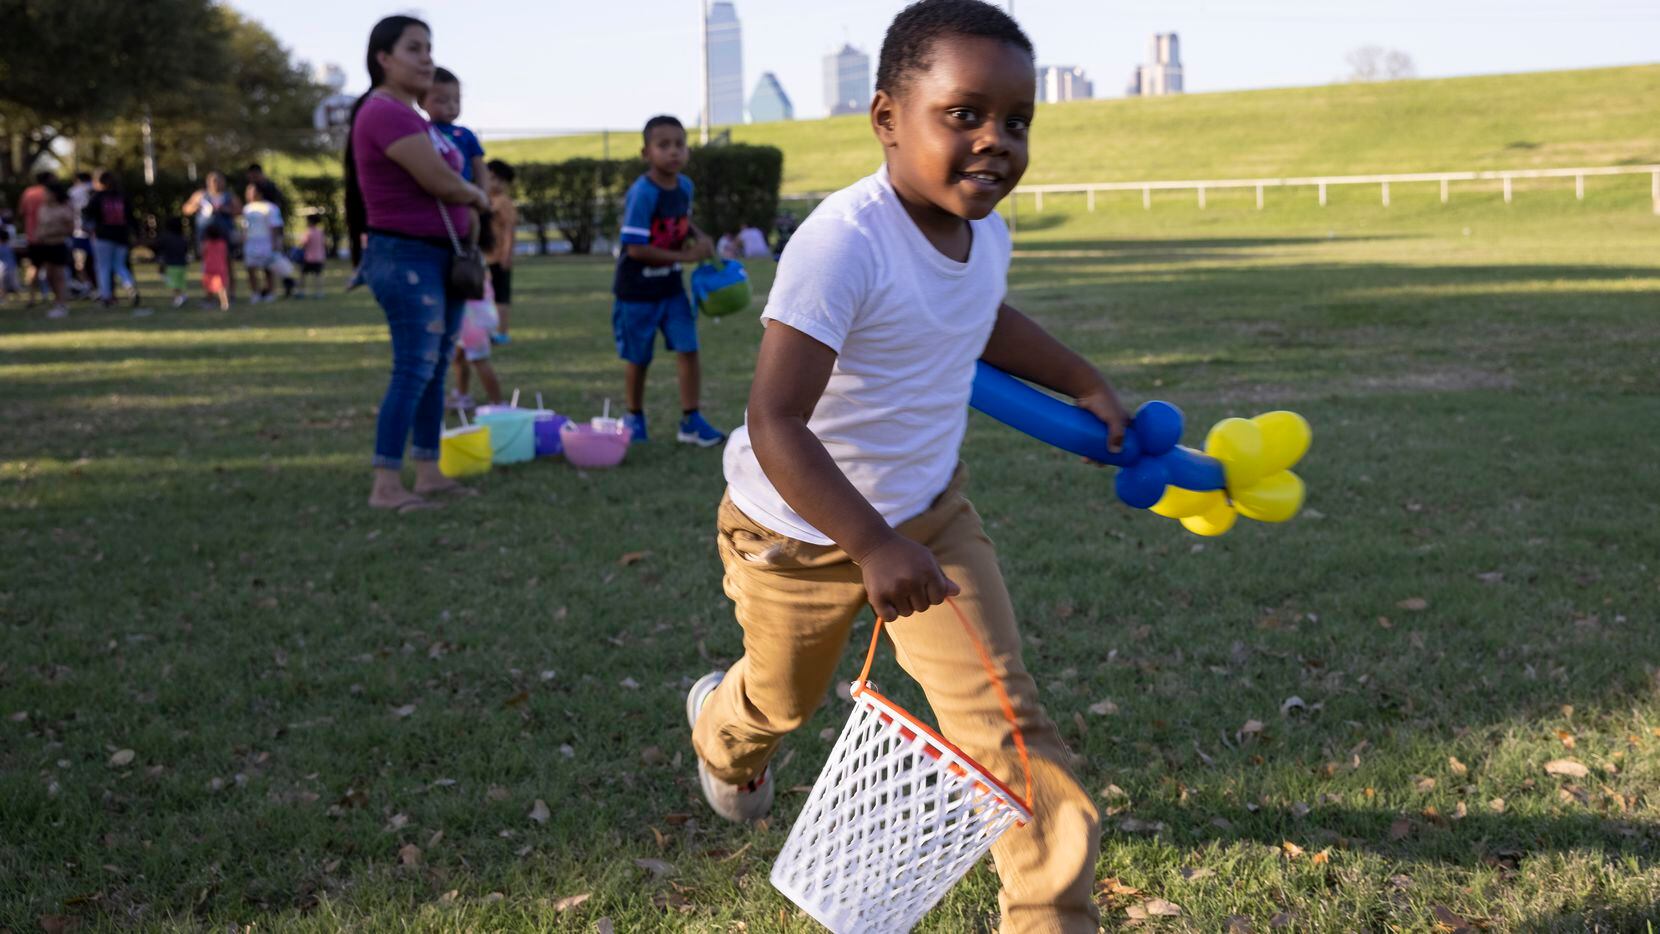 Peter King, 4, runs around before a Dallas Park and Recreation Egg'stravaganza Easter egg hunt.